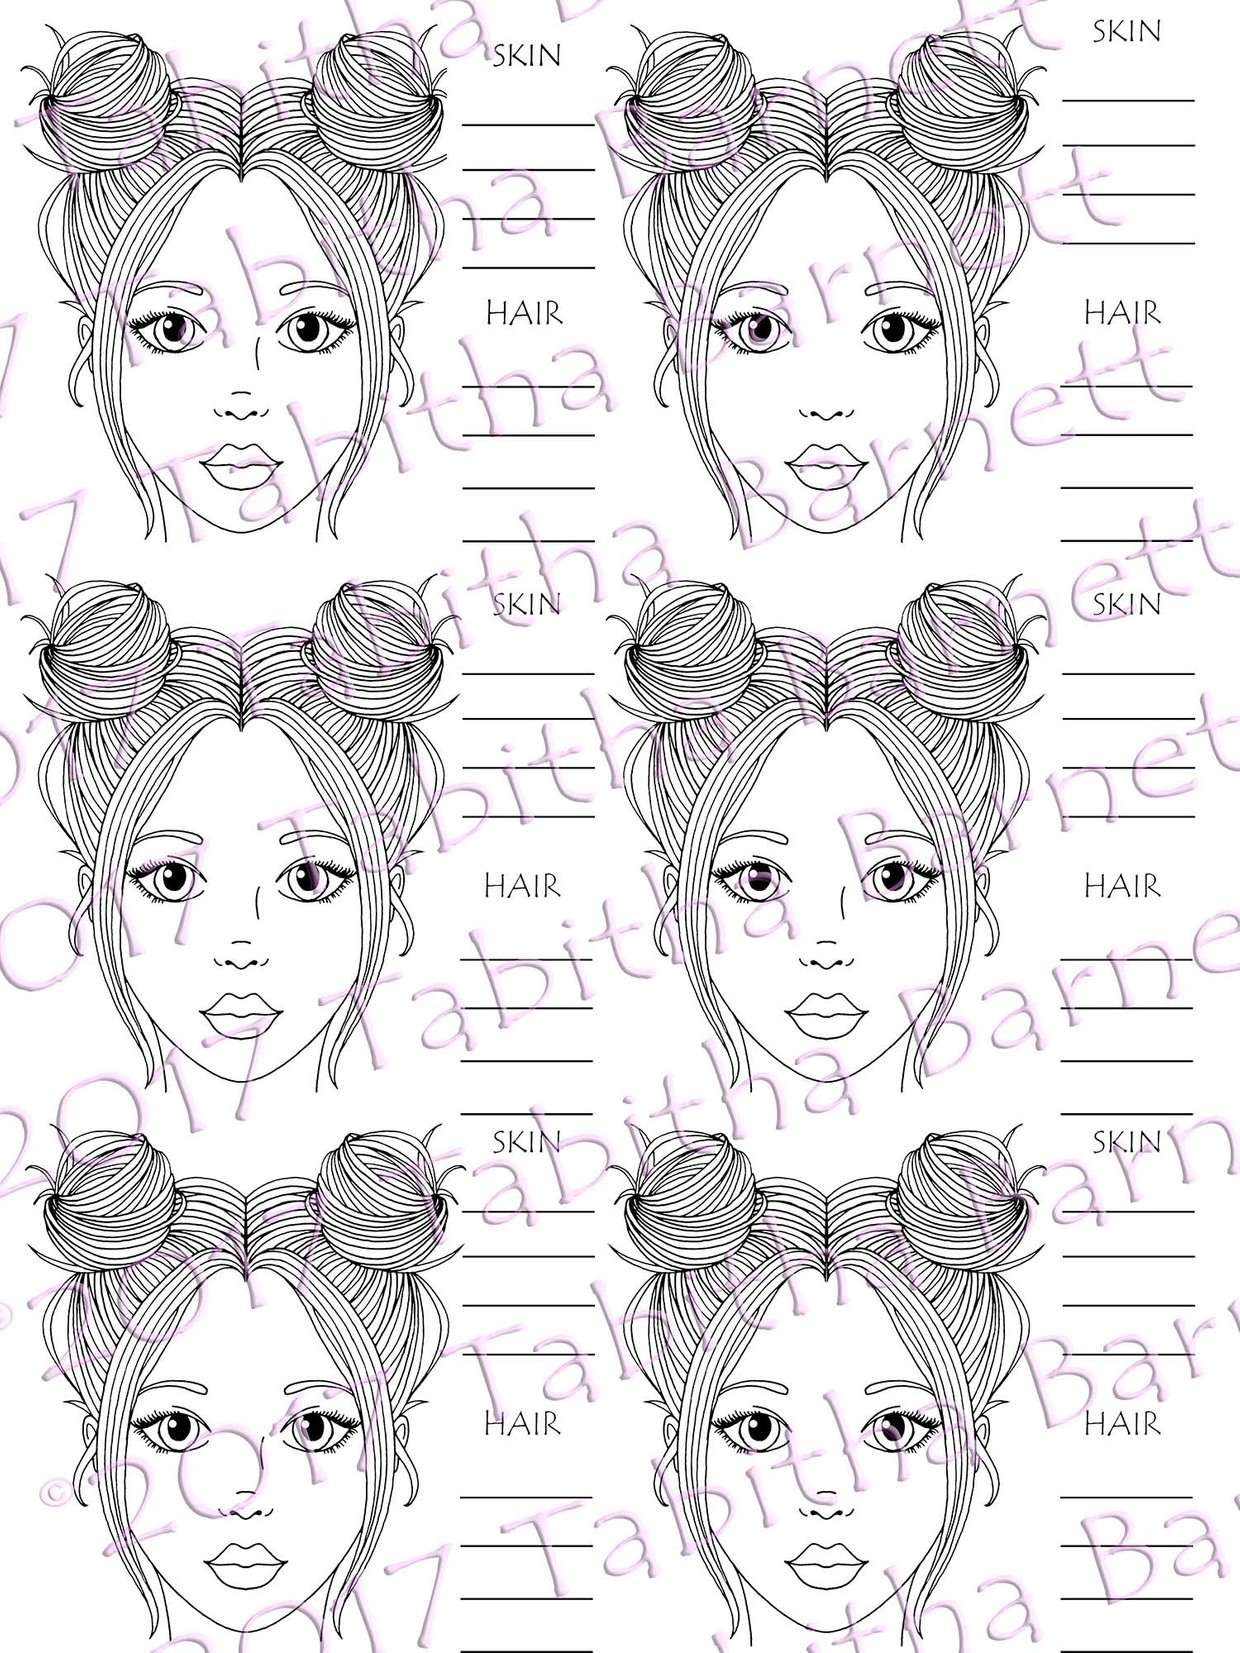 Blank hair and skin color charts and practice page pdf